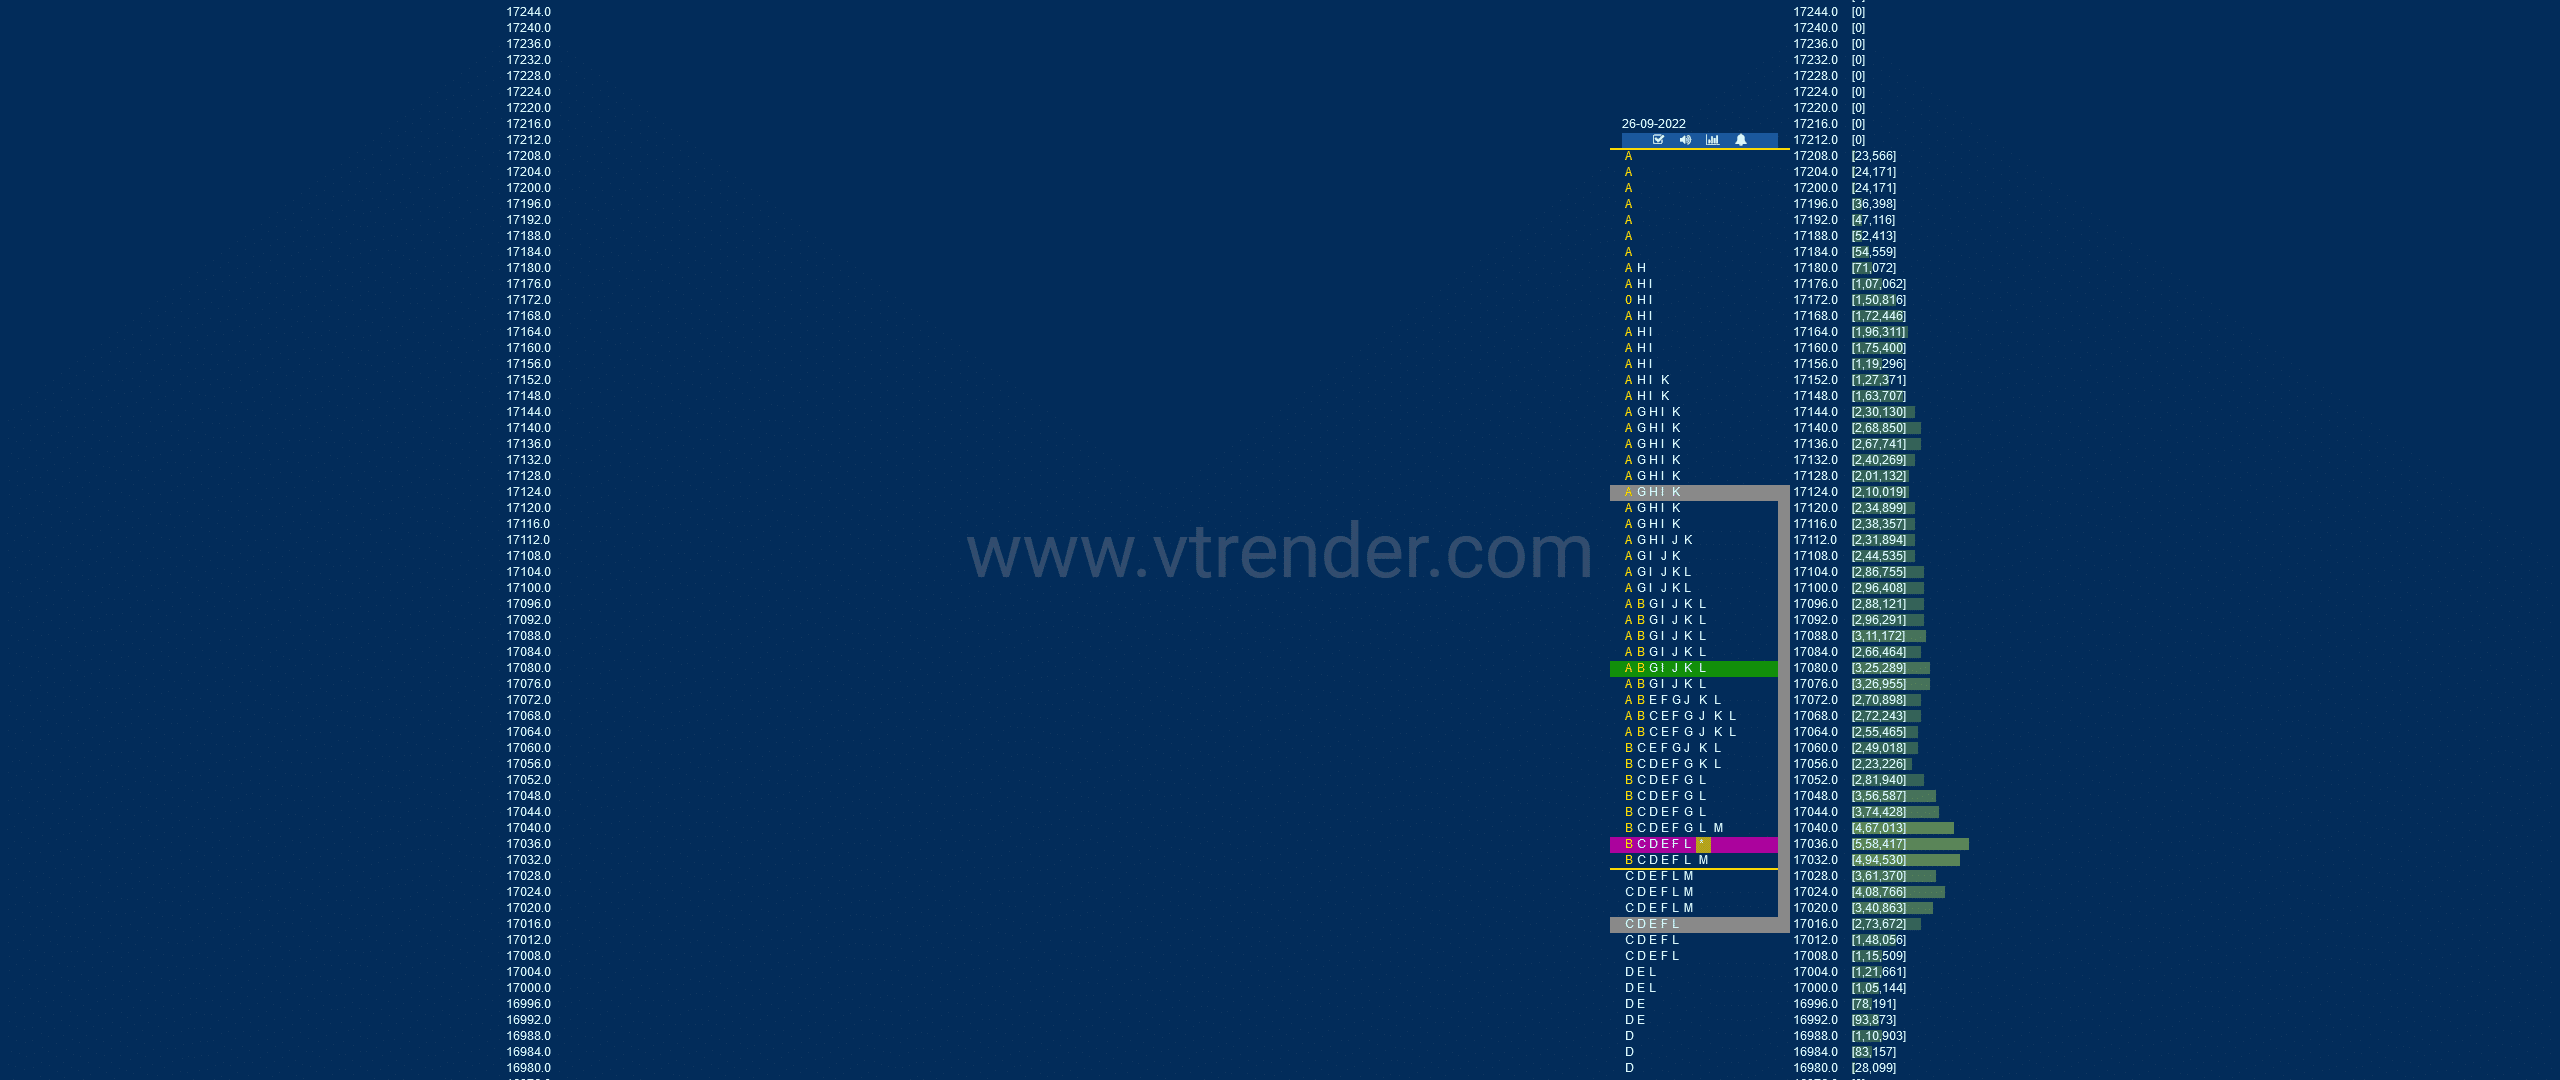 Nf 17 Market Profile Analysis Dated 26Th Sep 2022 Banknifty Futures, Charts, Day Trading, Intraday Trading, Intraday Trading Strategies, Market Profile, Market Profile Trading Strategies, Nifty Futures, Order Flow Analysis, Support And Resistance, Technical Analysis, Trading Strategies, Volume Profile Trading